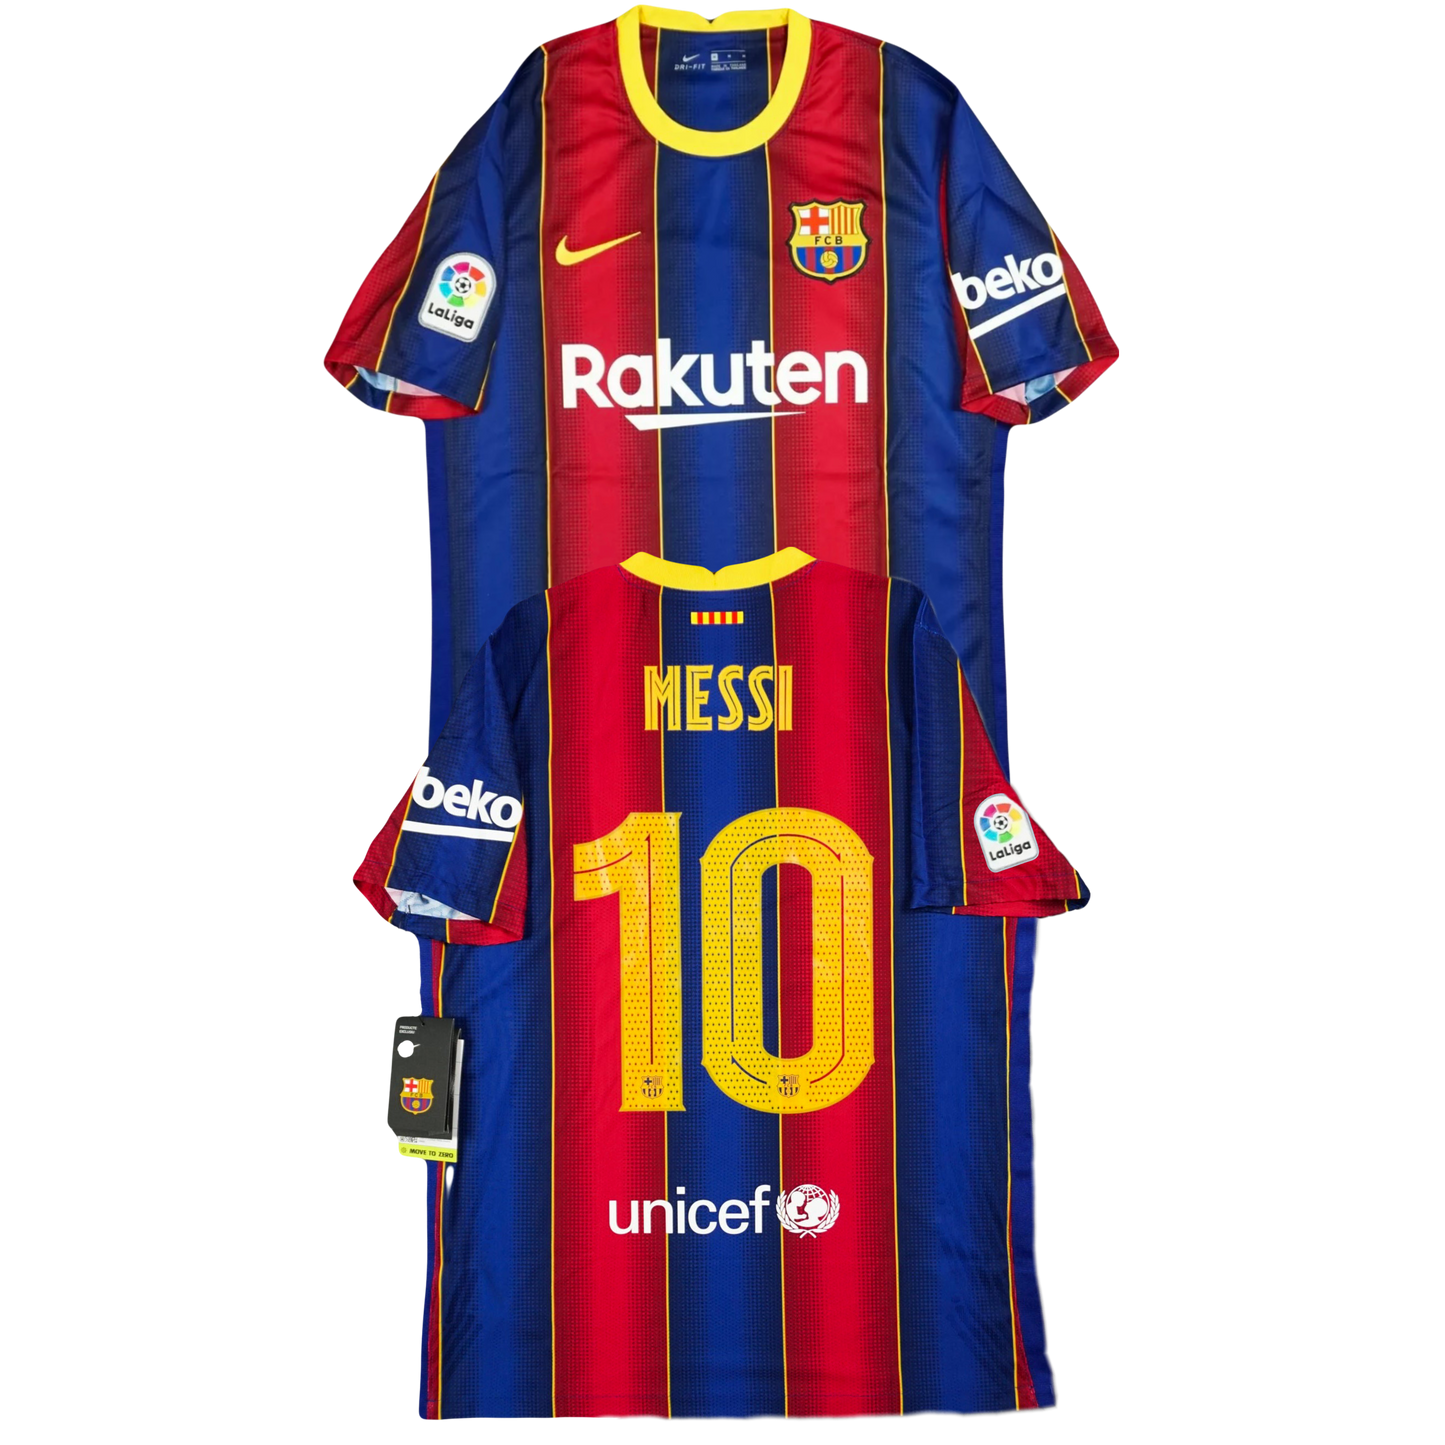 Lionel Messi FC Barcelona Nike 2020/21 Season Home Kit Iconic Authentic Nike Jersey - Blue & Red